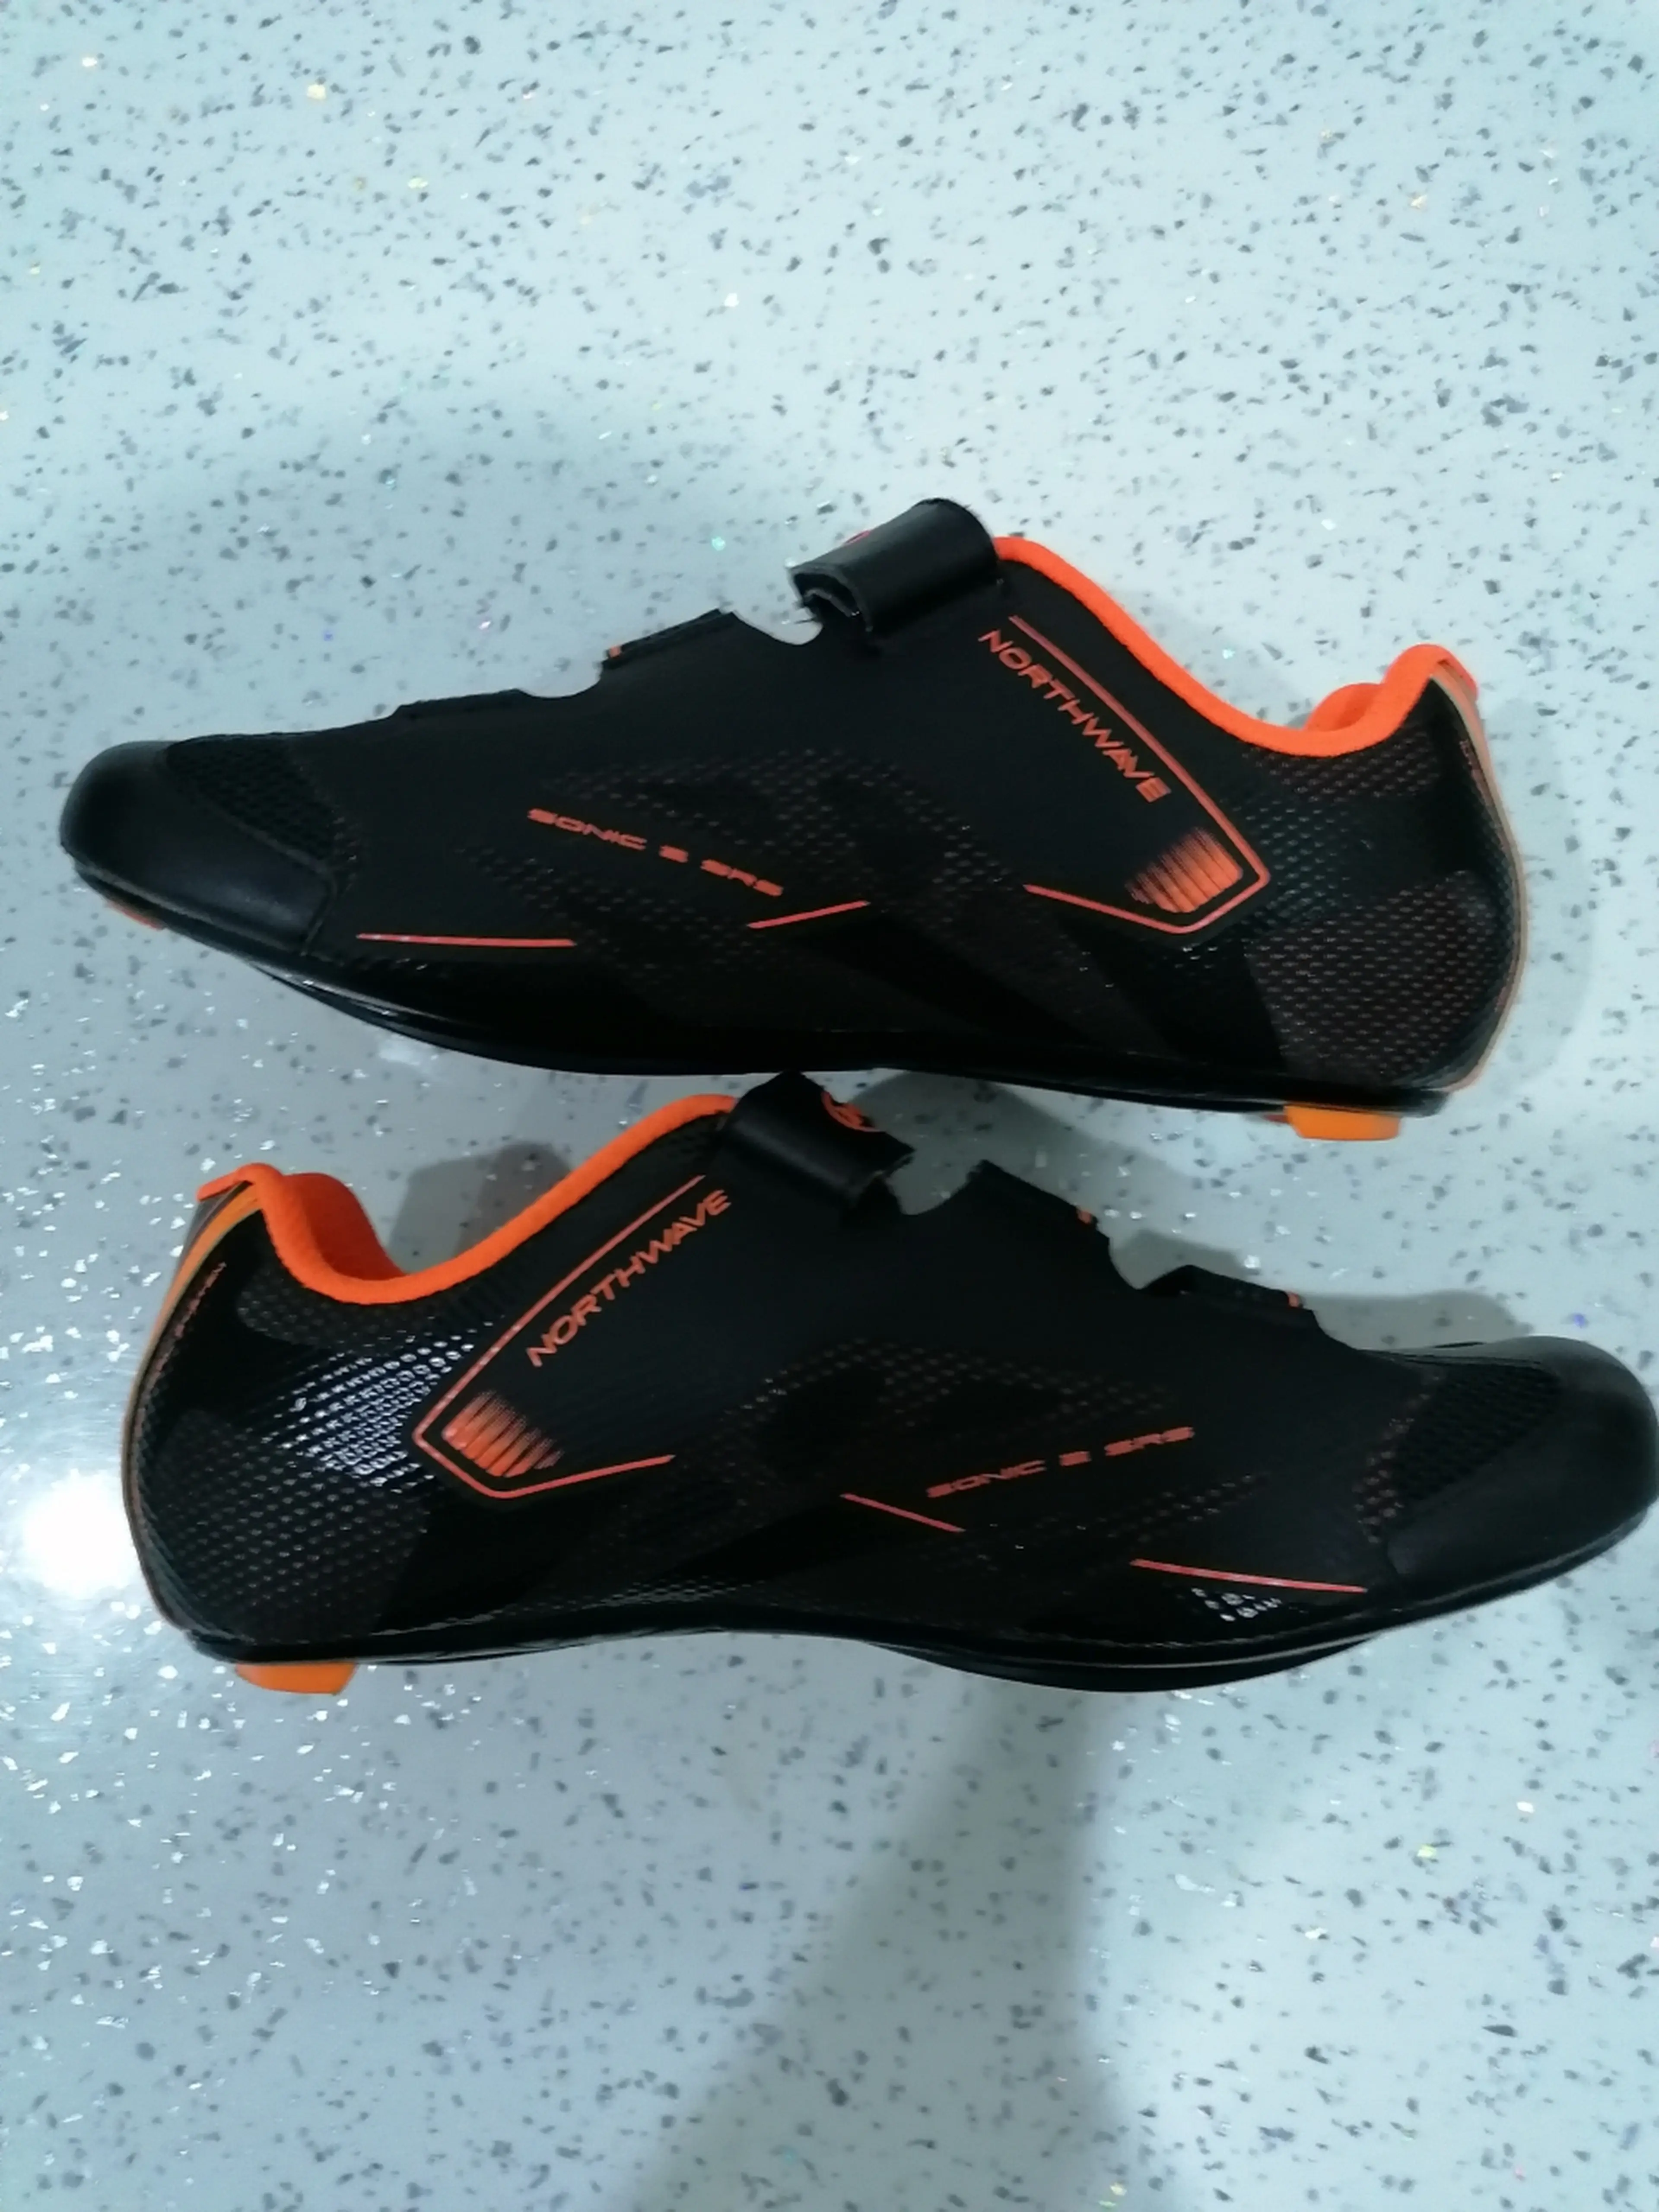 2. Northwave Sonic Srs 2 road size 43